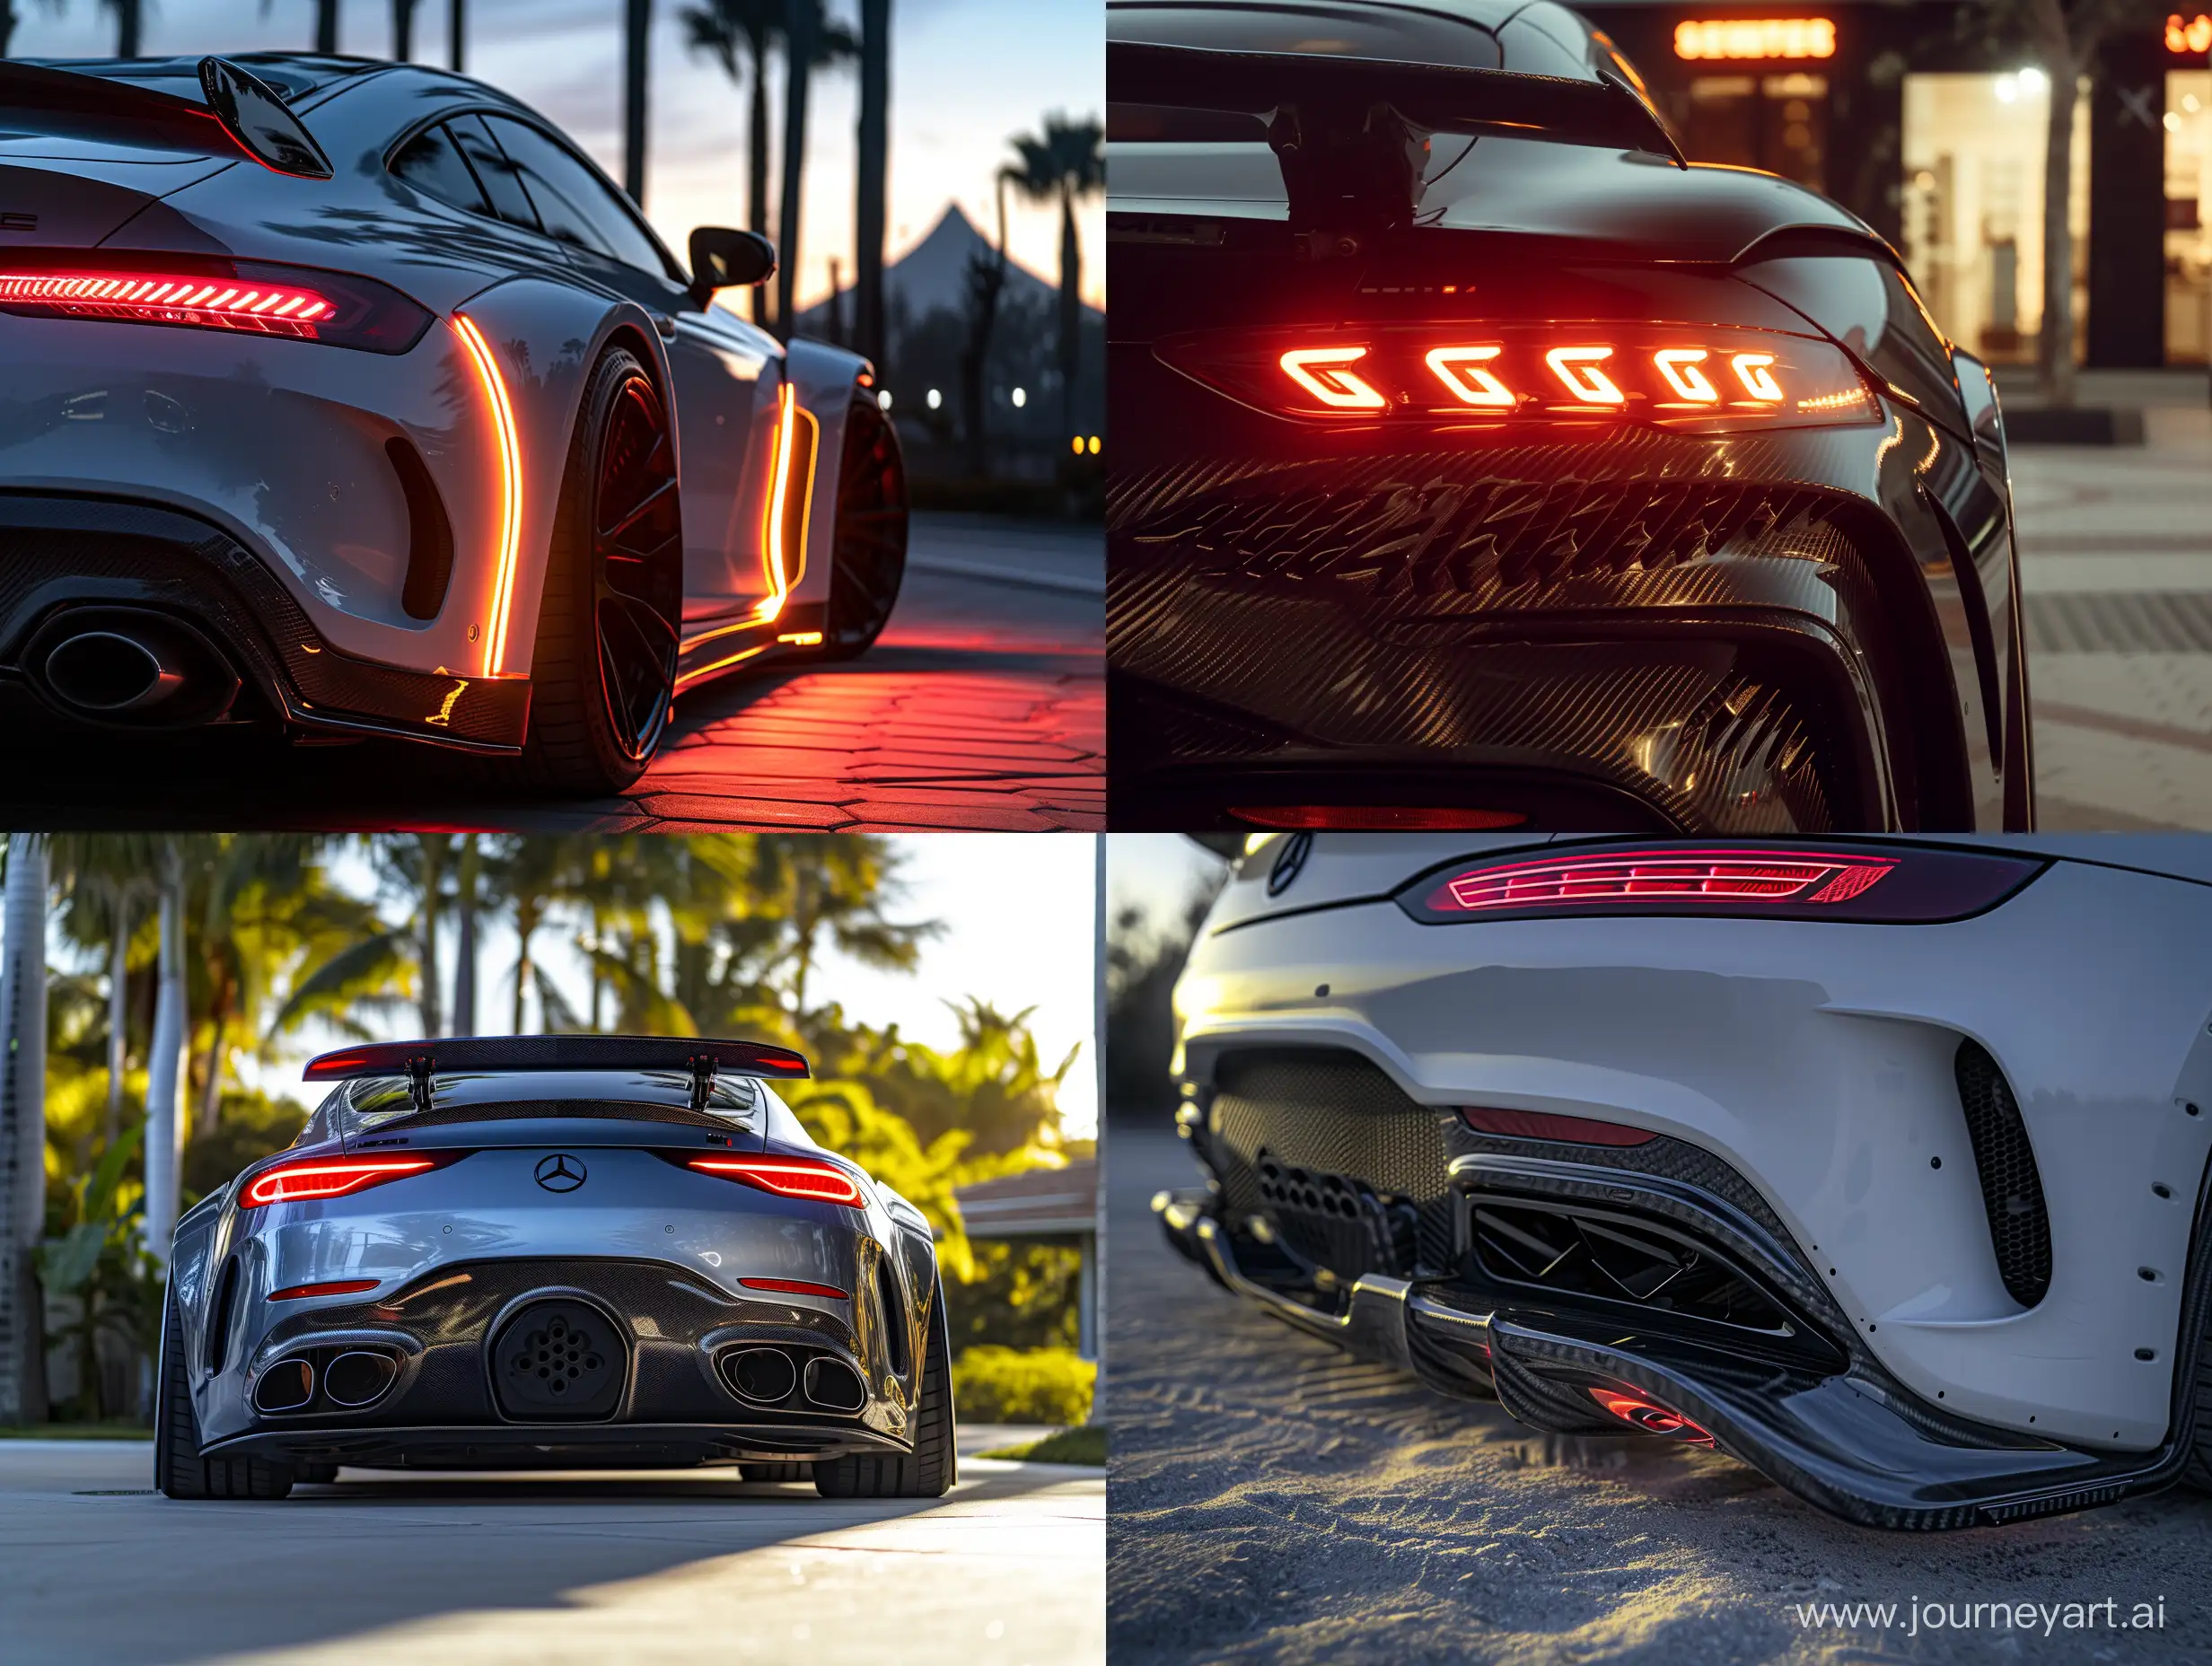 Futuristic-Mercedes-Benz-Sec-560-AMG-with-Wide-Body-Custom-LED-Tail-Lights-and-Carbon-Fiber-Detail